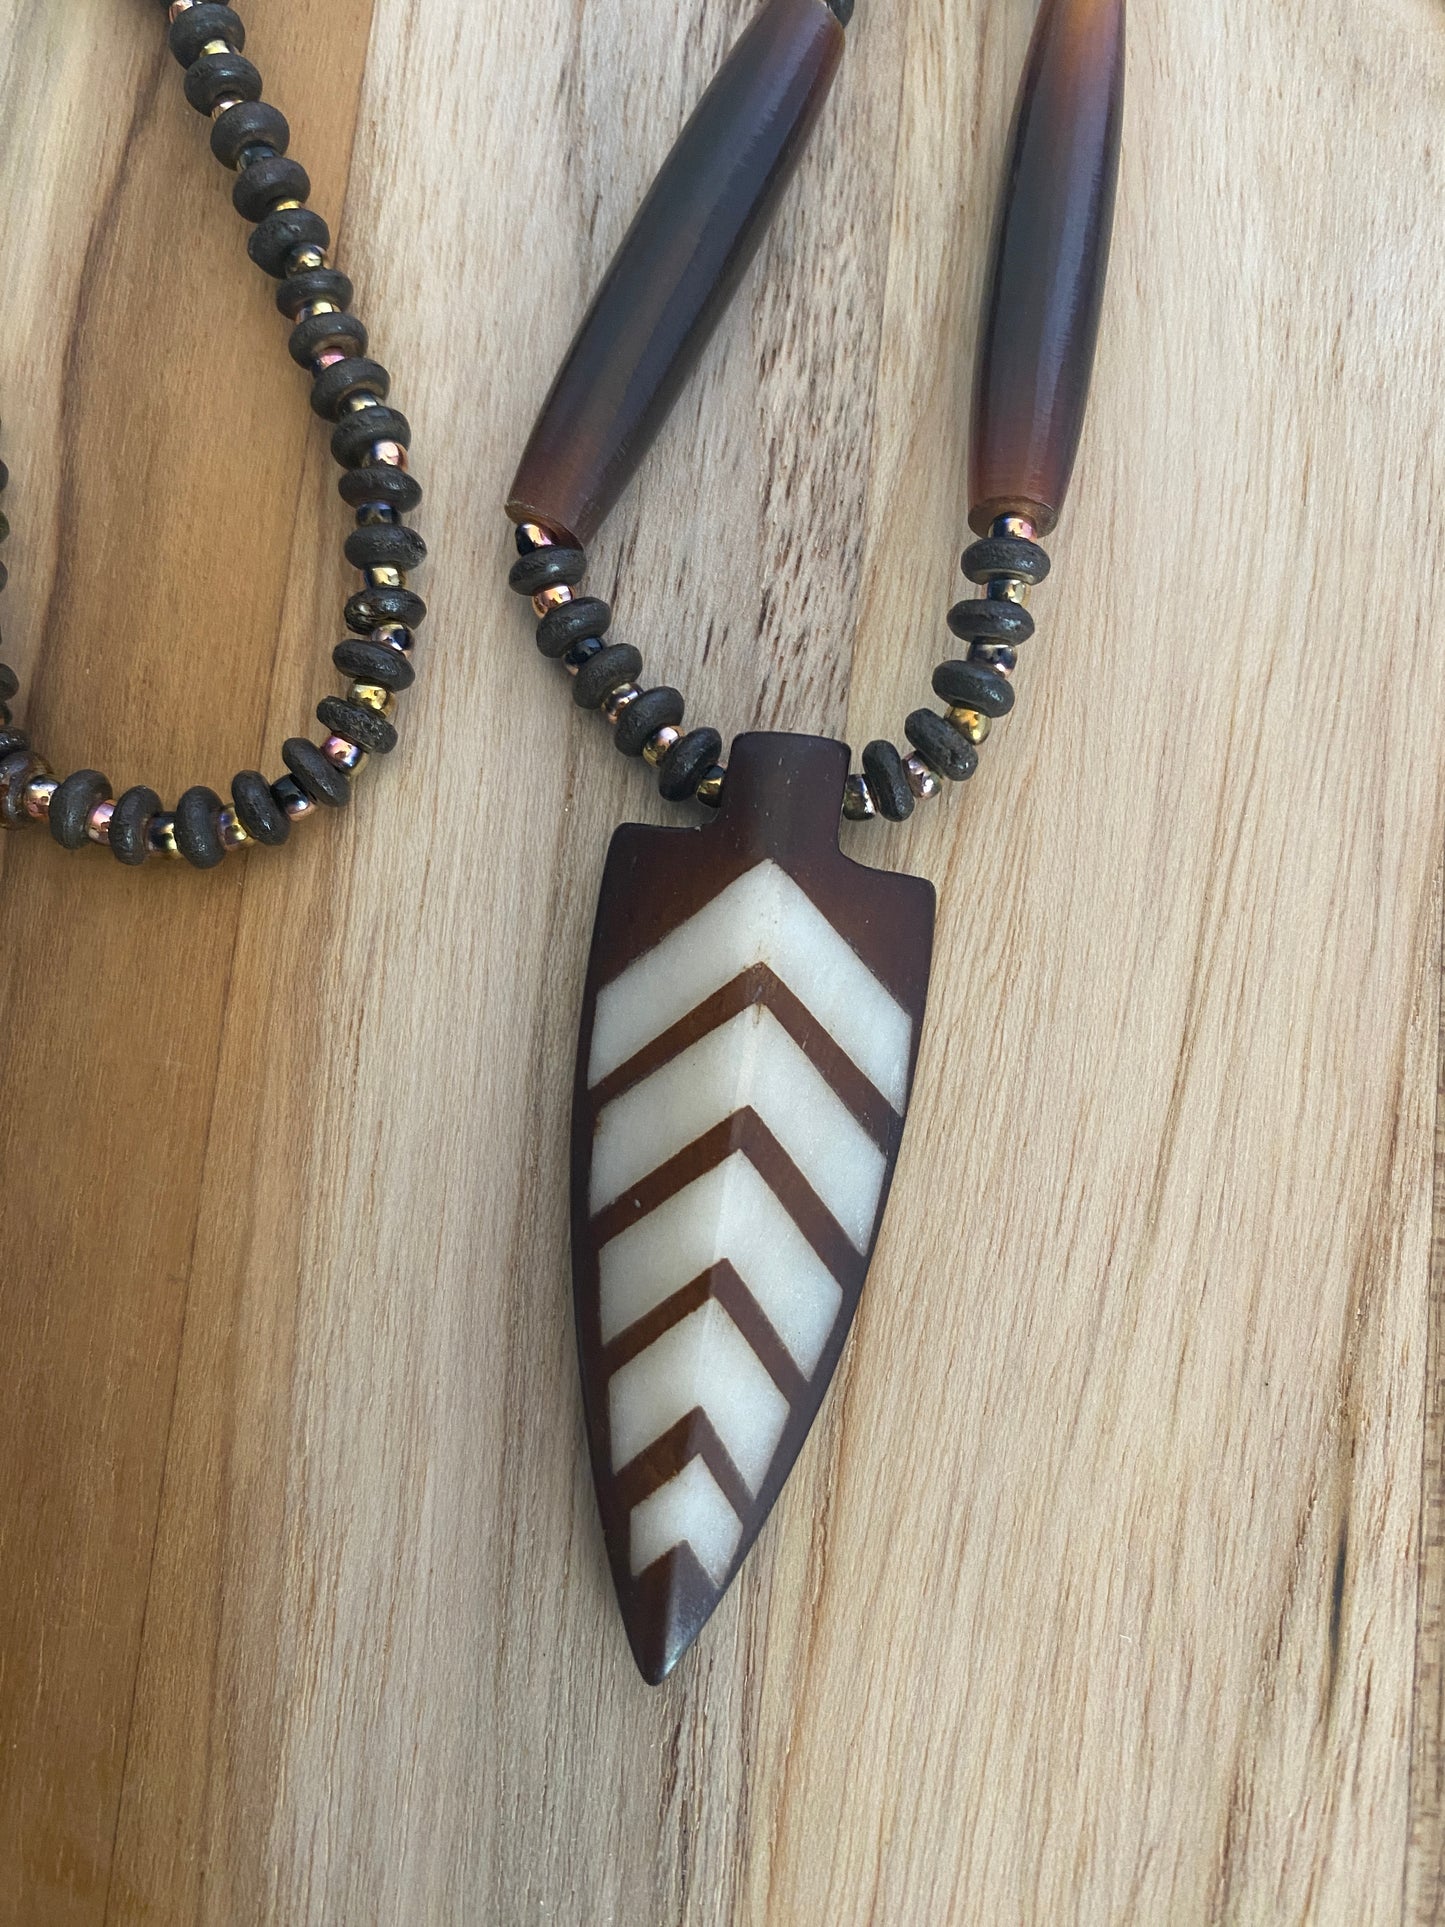 30" Long Unisex Native Inspired Arrowhead Pendant Necklace with Hairpipe, Horn & Seed Beads